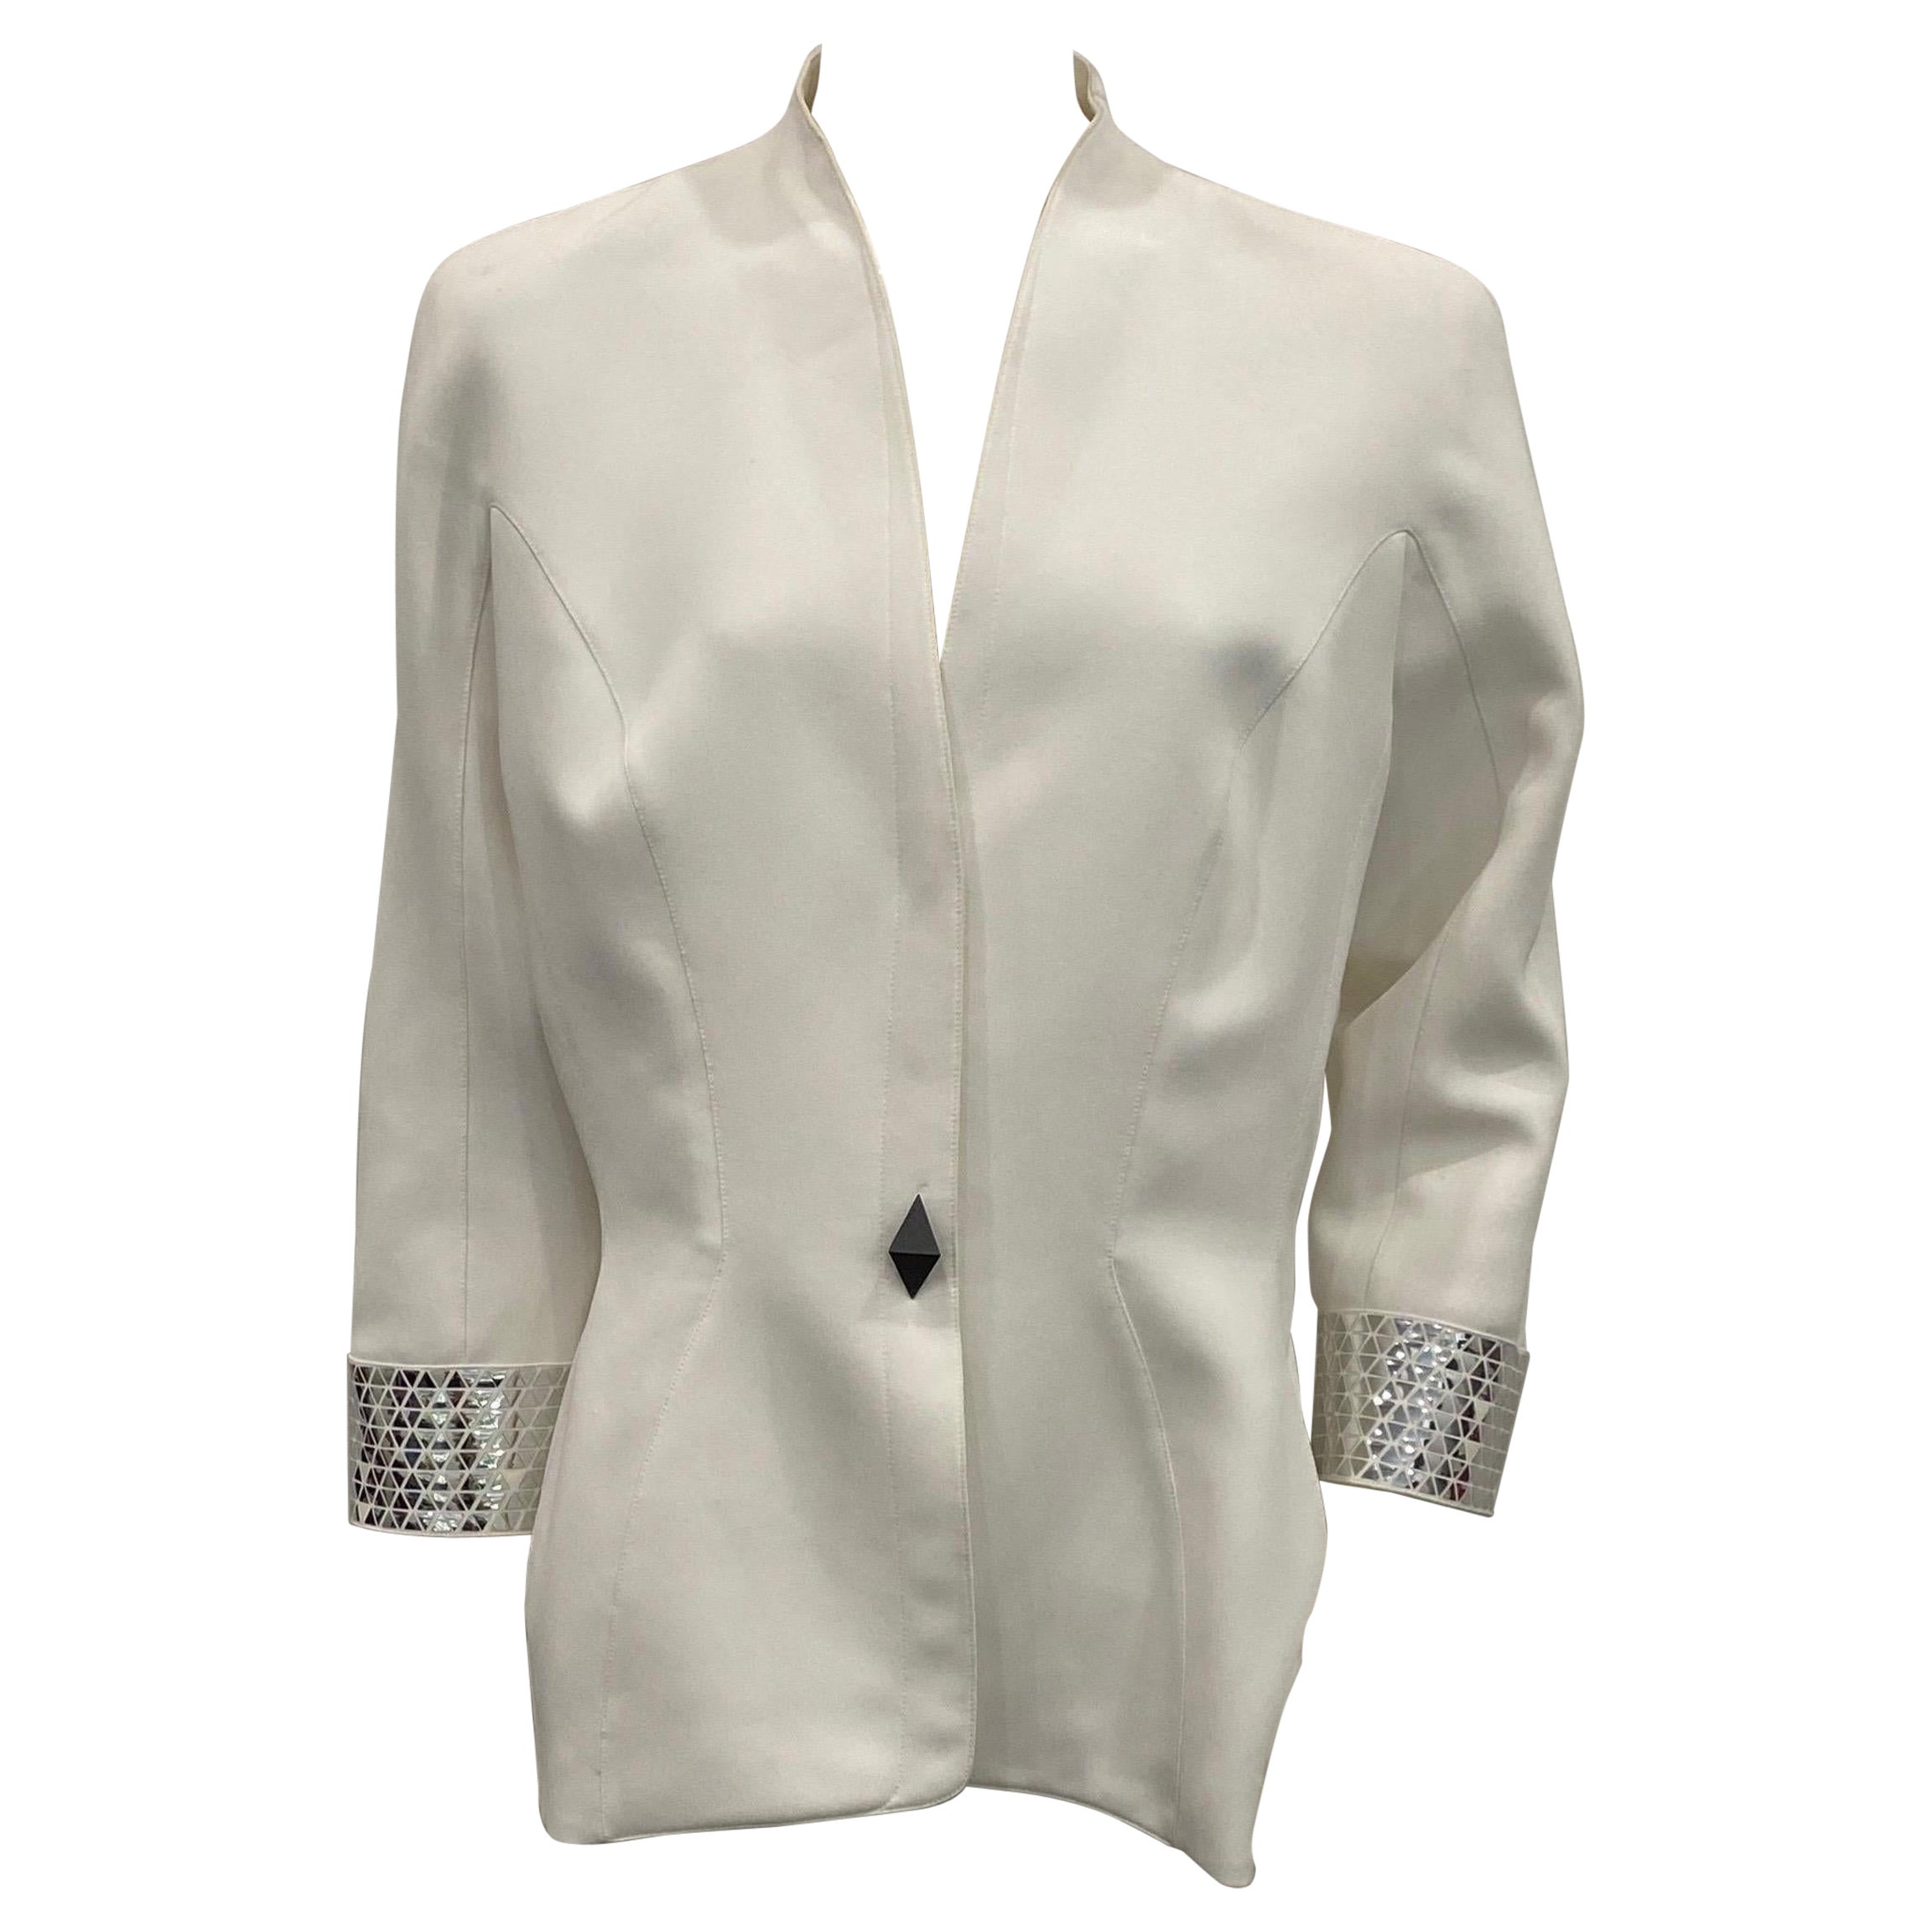 Thierry Mugler Couture 1990s White Jacket with Silver metallic details - Size 46 For Sale